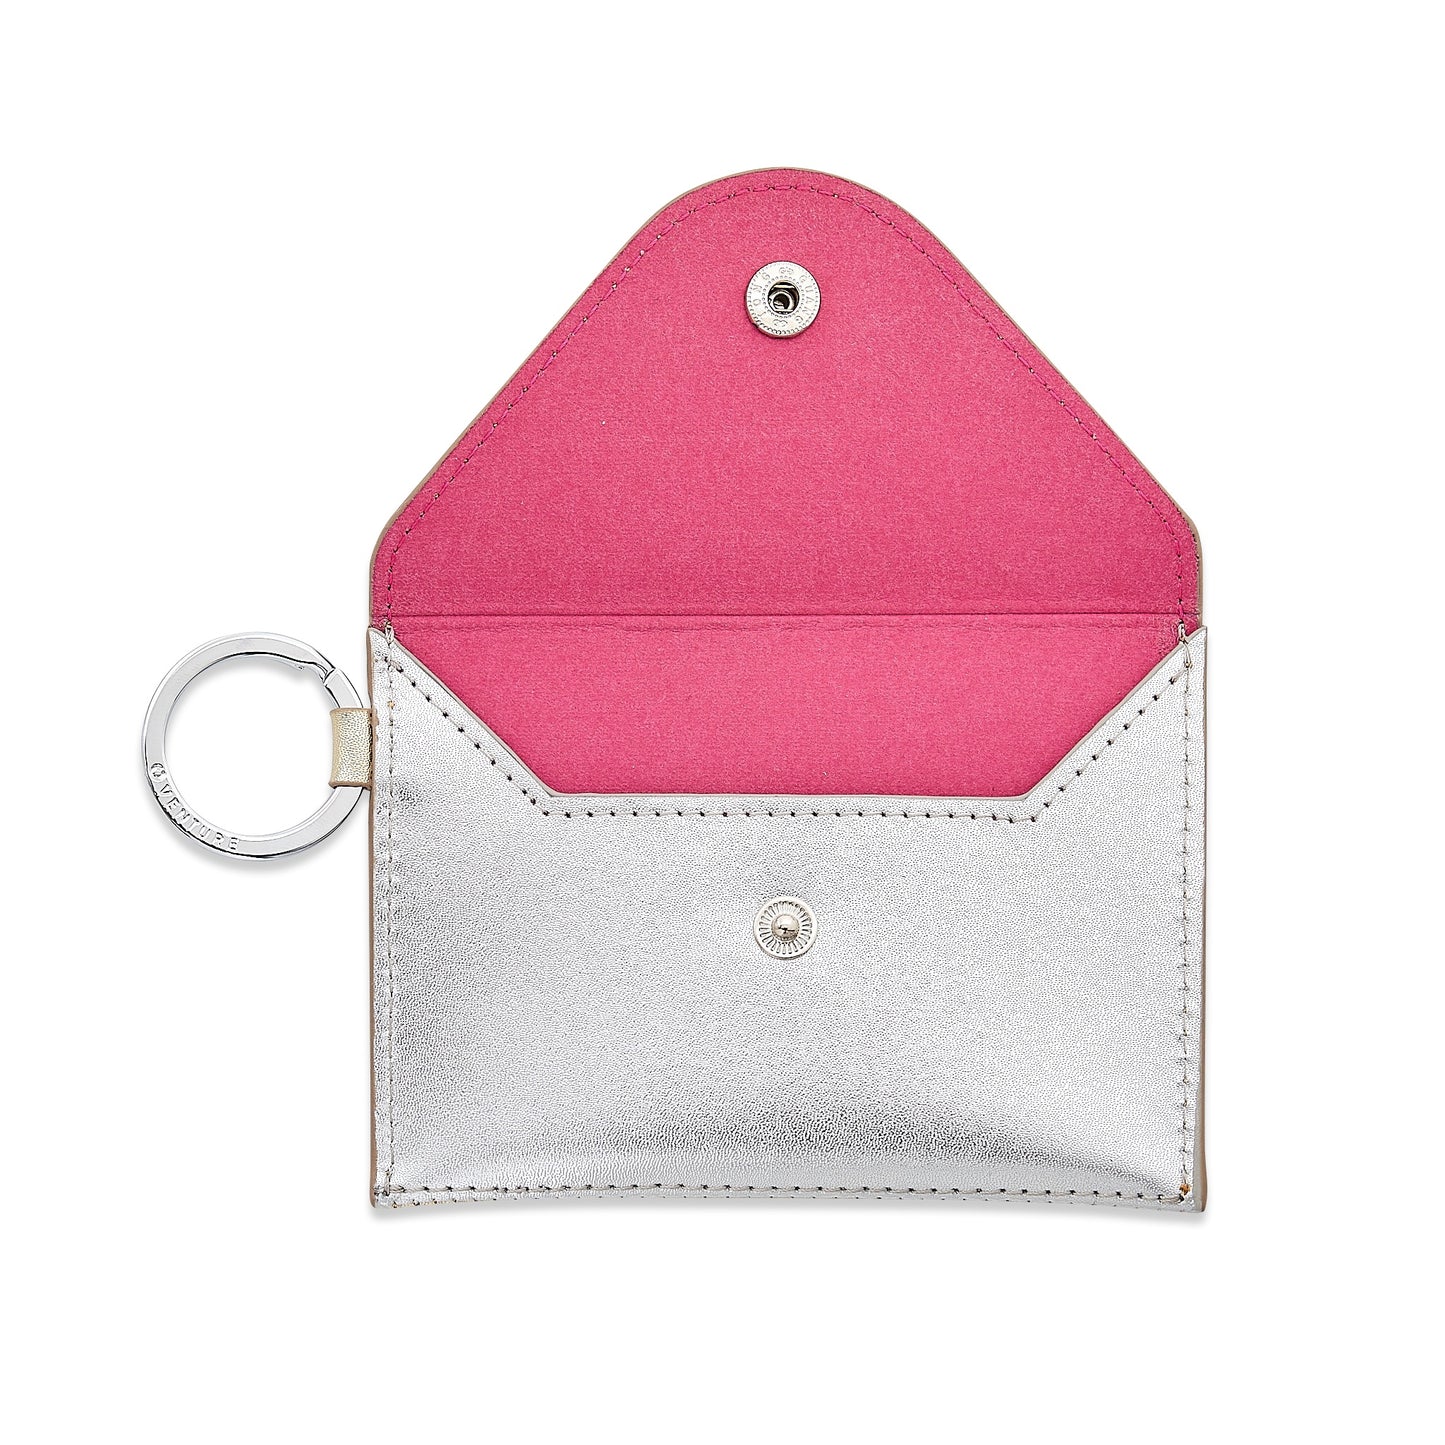 Stylish leather keychain wallet in mini envelope design.  Shown open with pink liner.